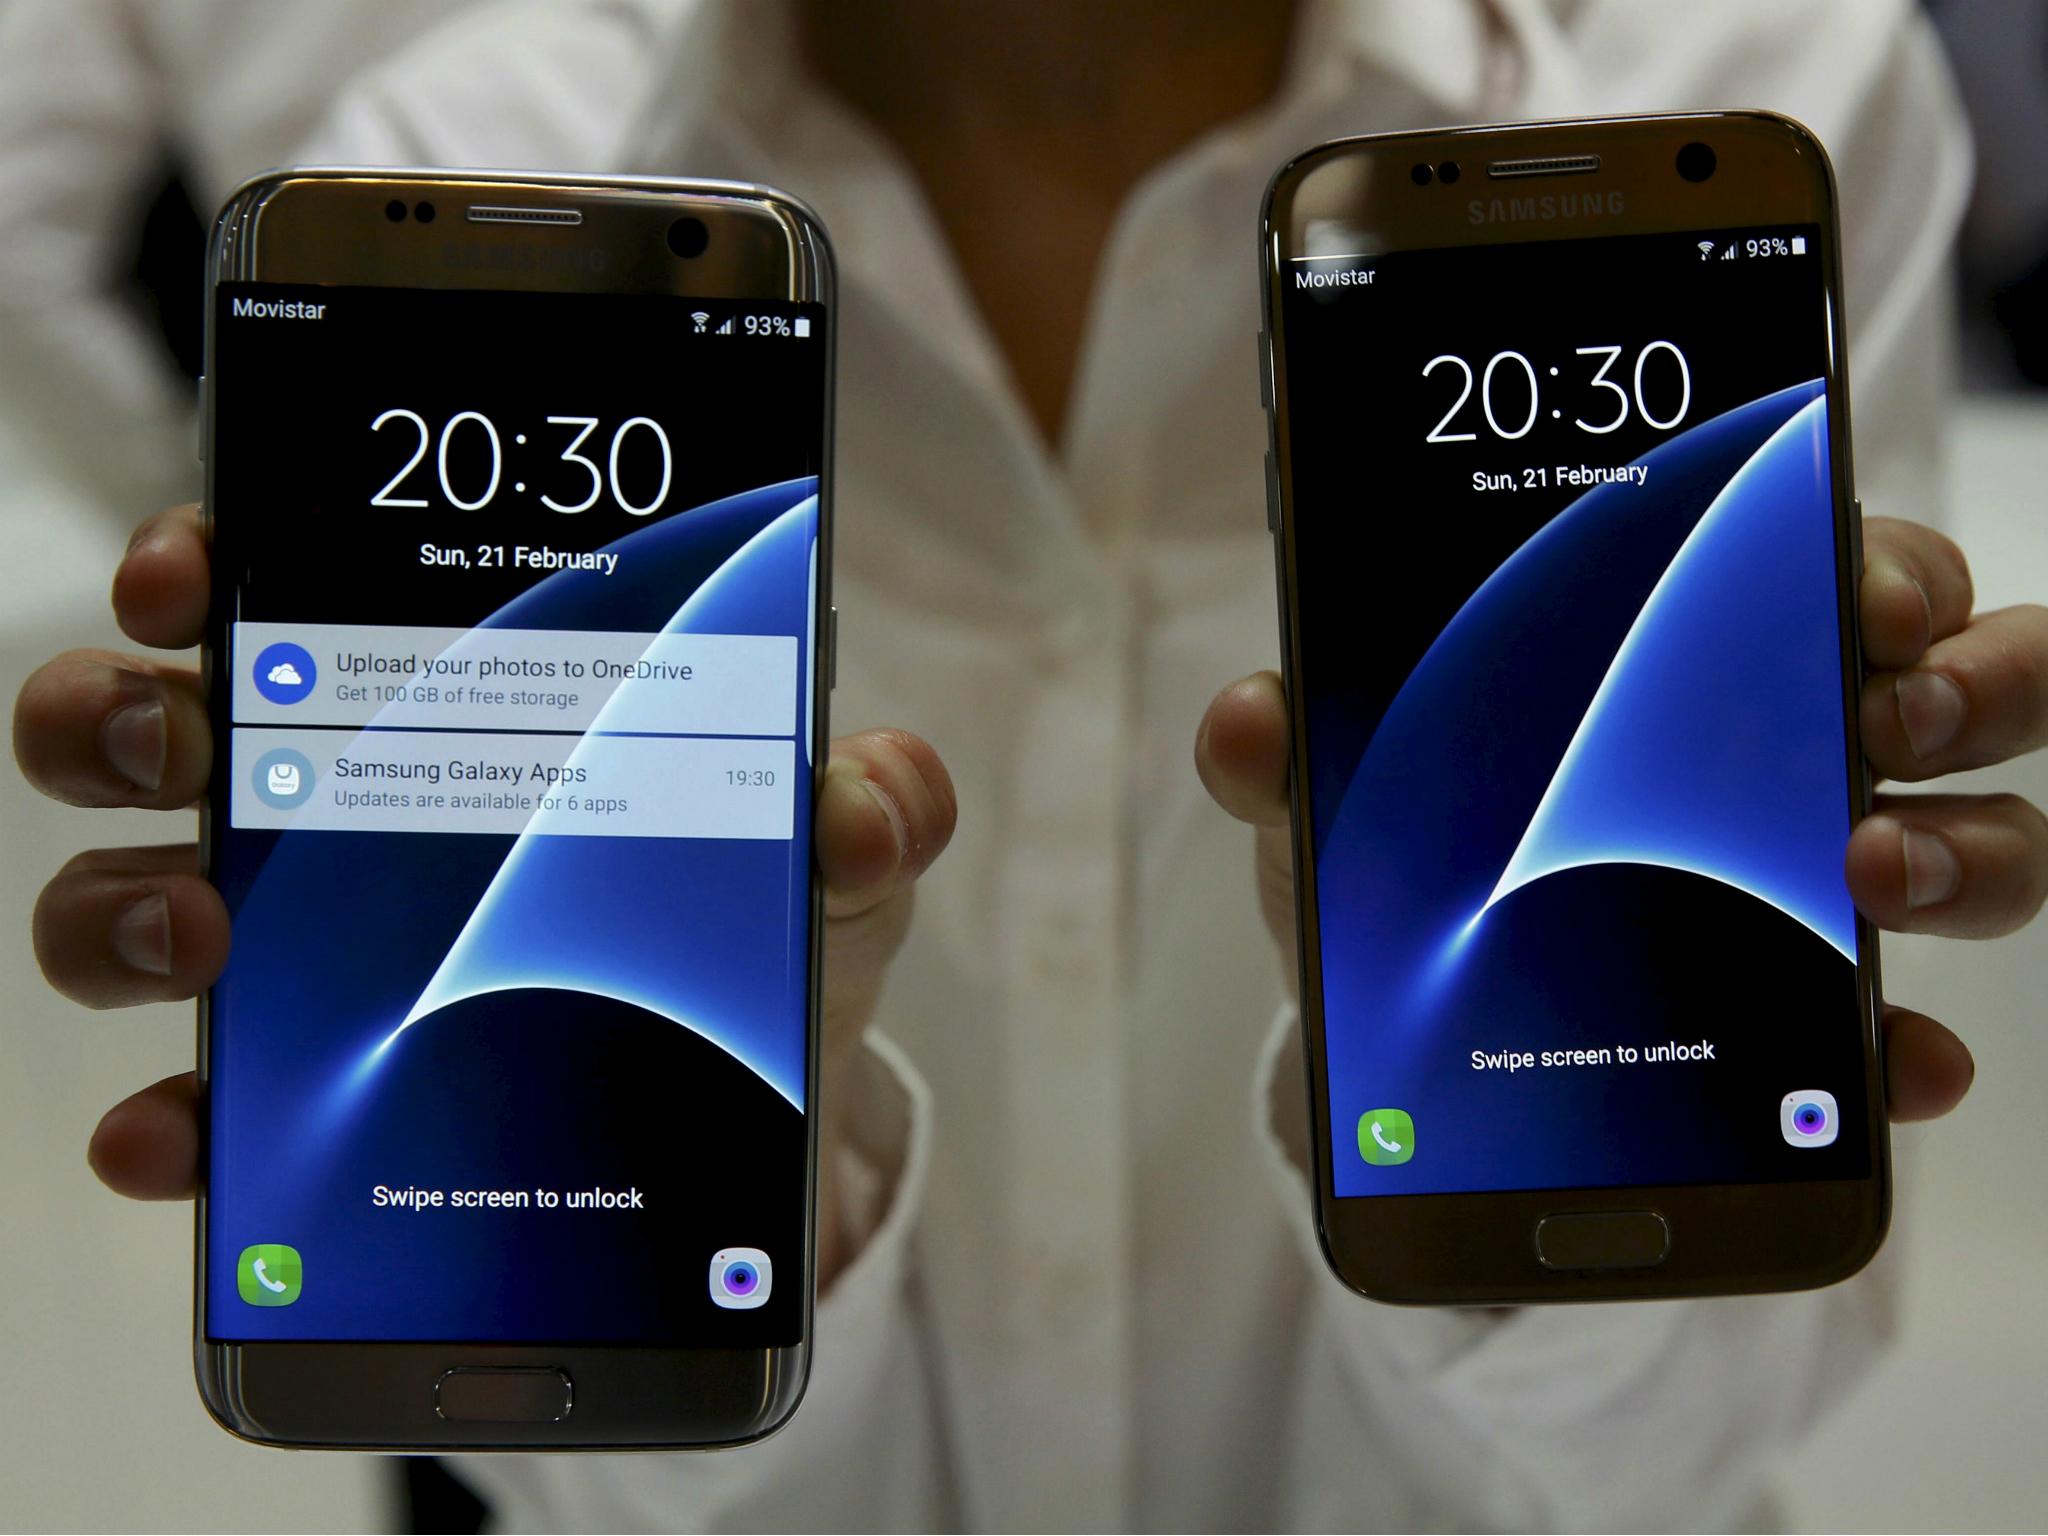 The Galaxy S7 came in both curved and flat-screen options, but rumours suggest the S8 will not